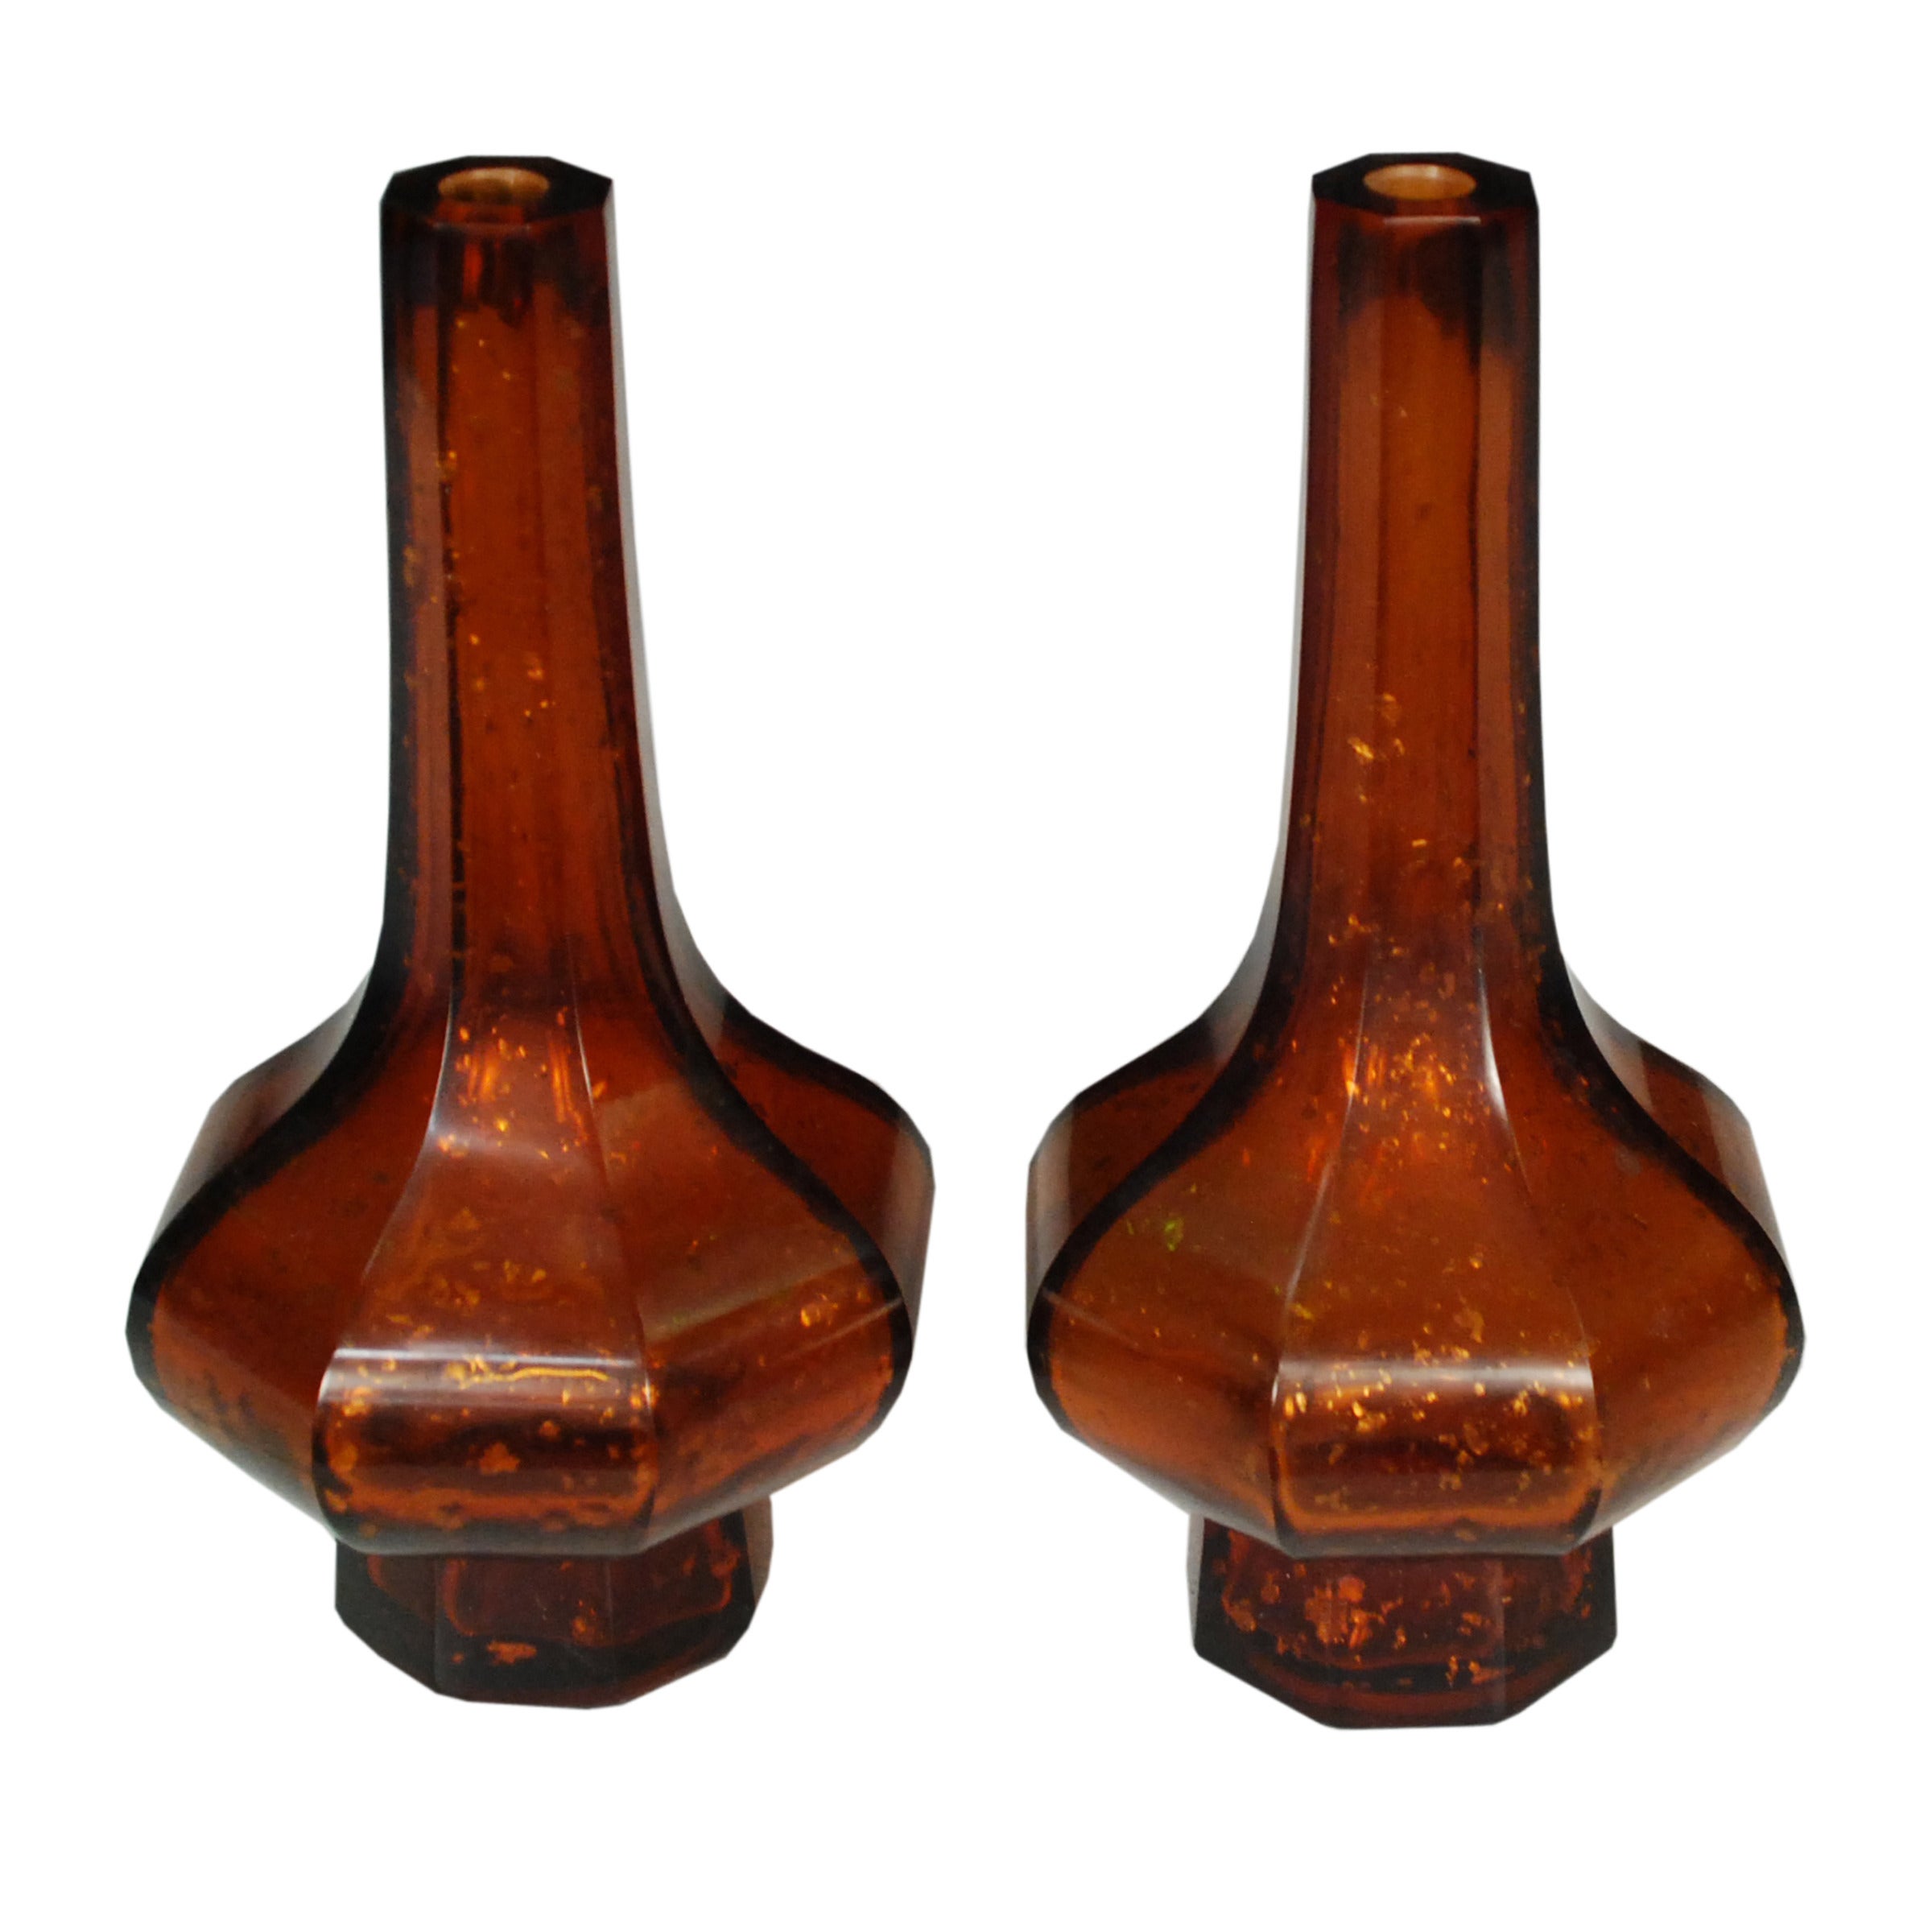 Pair of Early 20th Century Chinese Oxblood Peking Glass Bud Vases